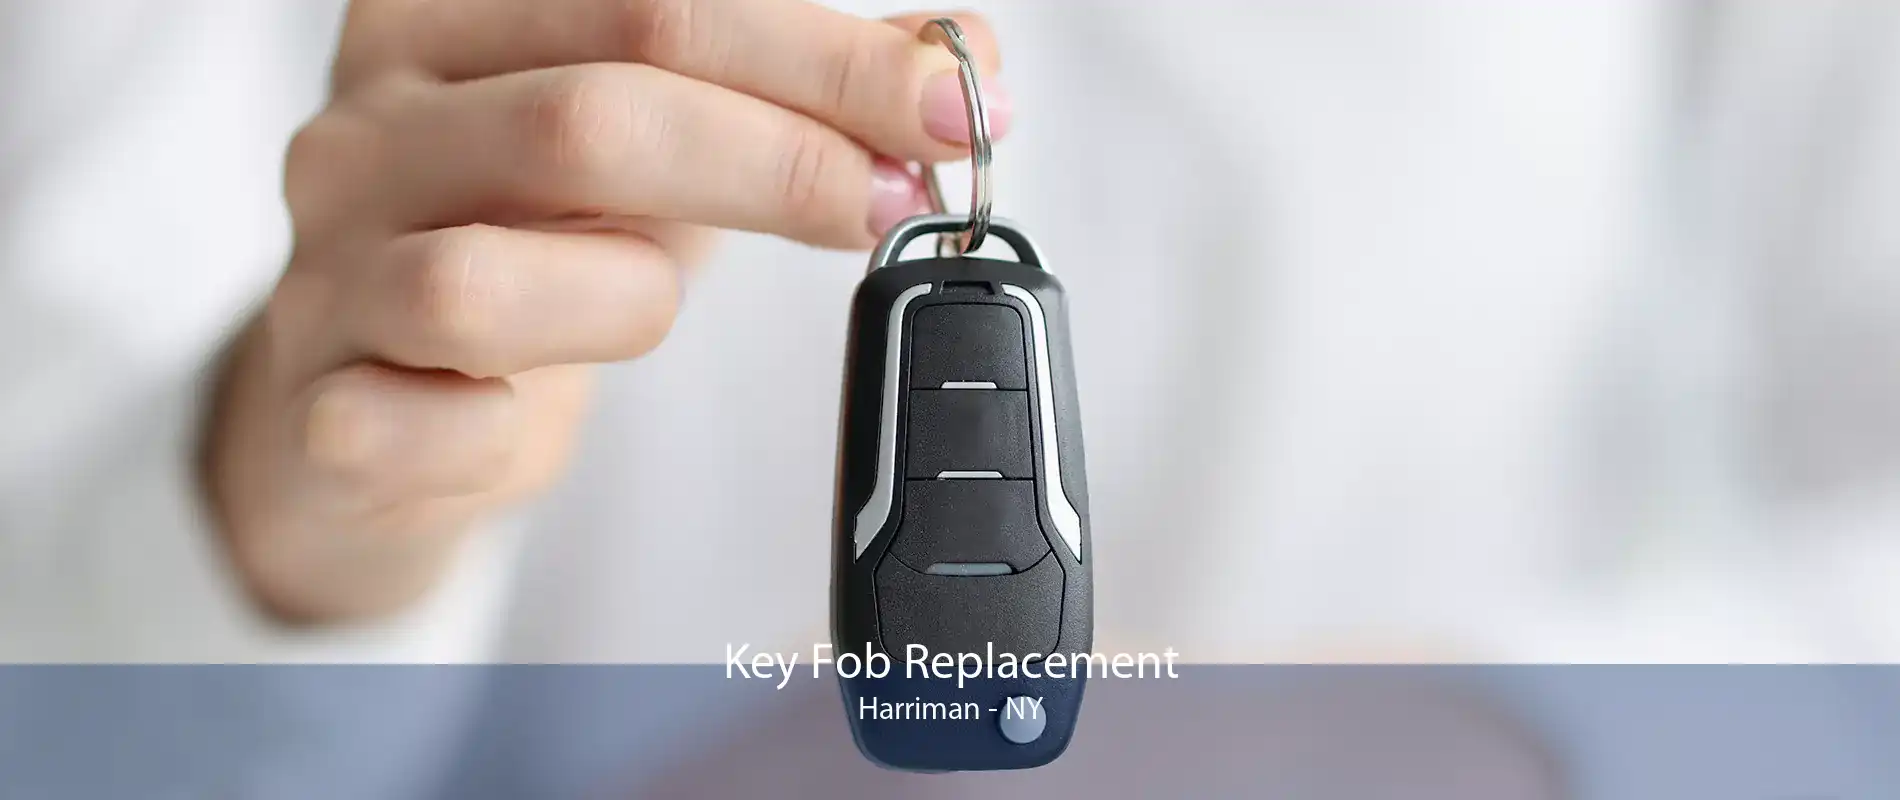 Key Fob Replacement Harriman - NY